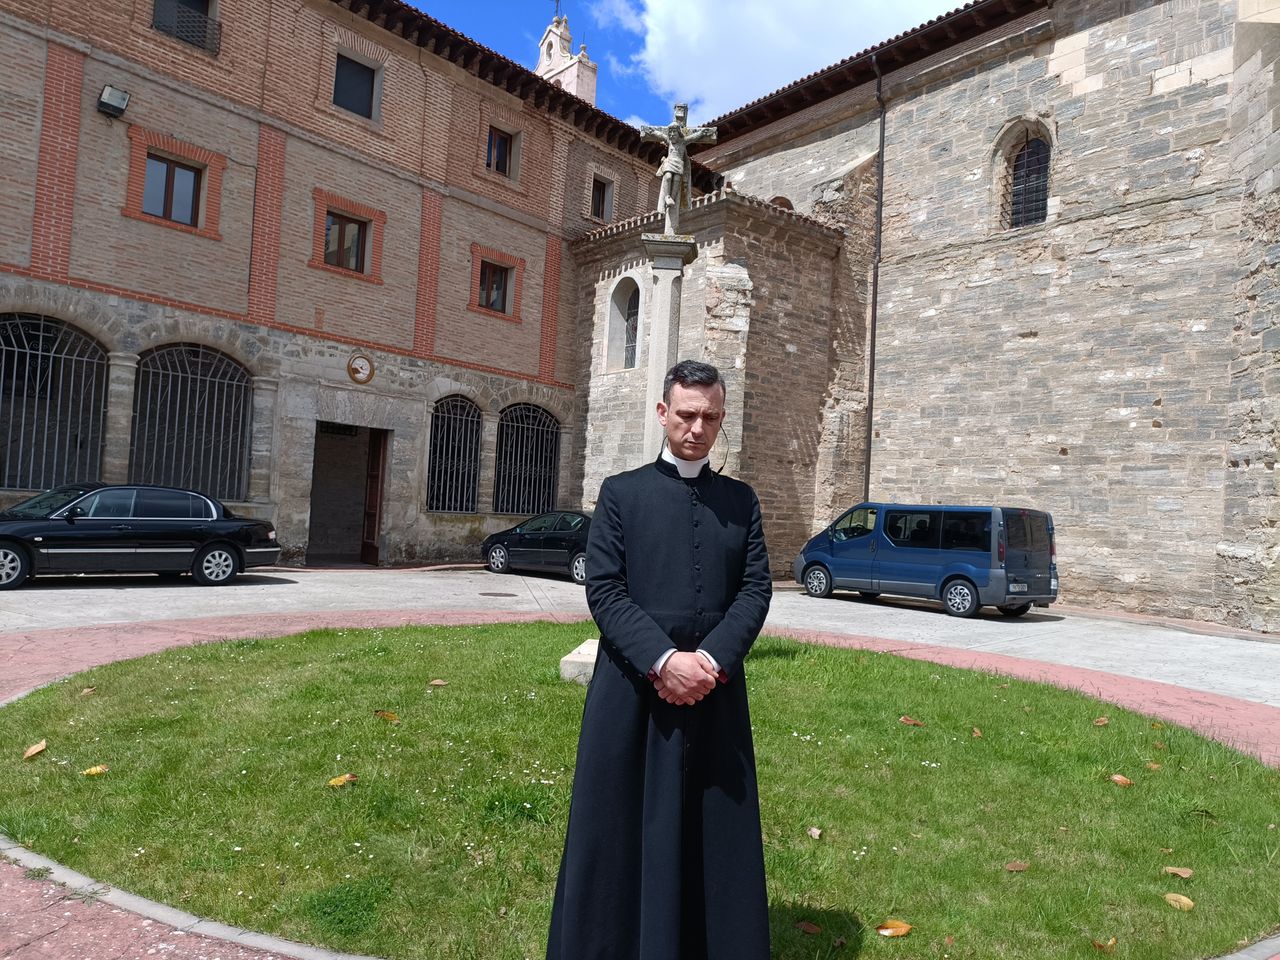 A spokesperson for the Poor Clares from the Belorado monastery accused the current Church of being established "by frauds who dedicate themselves to seizing property, deceiving people, and plunging thousands of people into ruin."